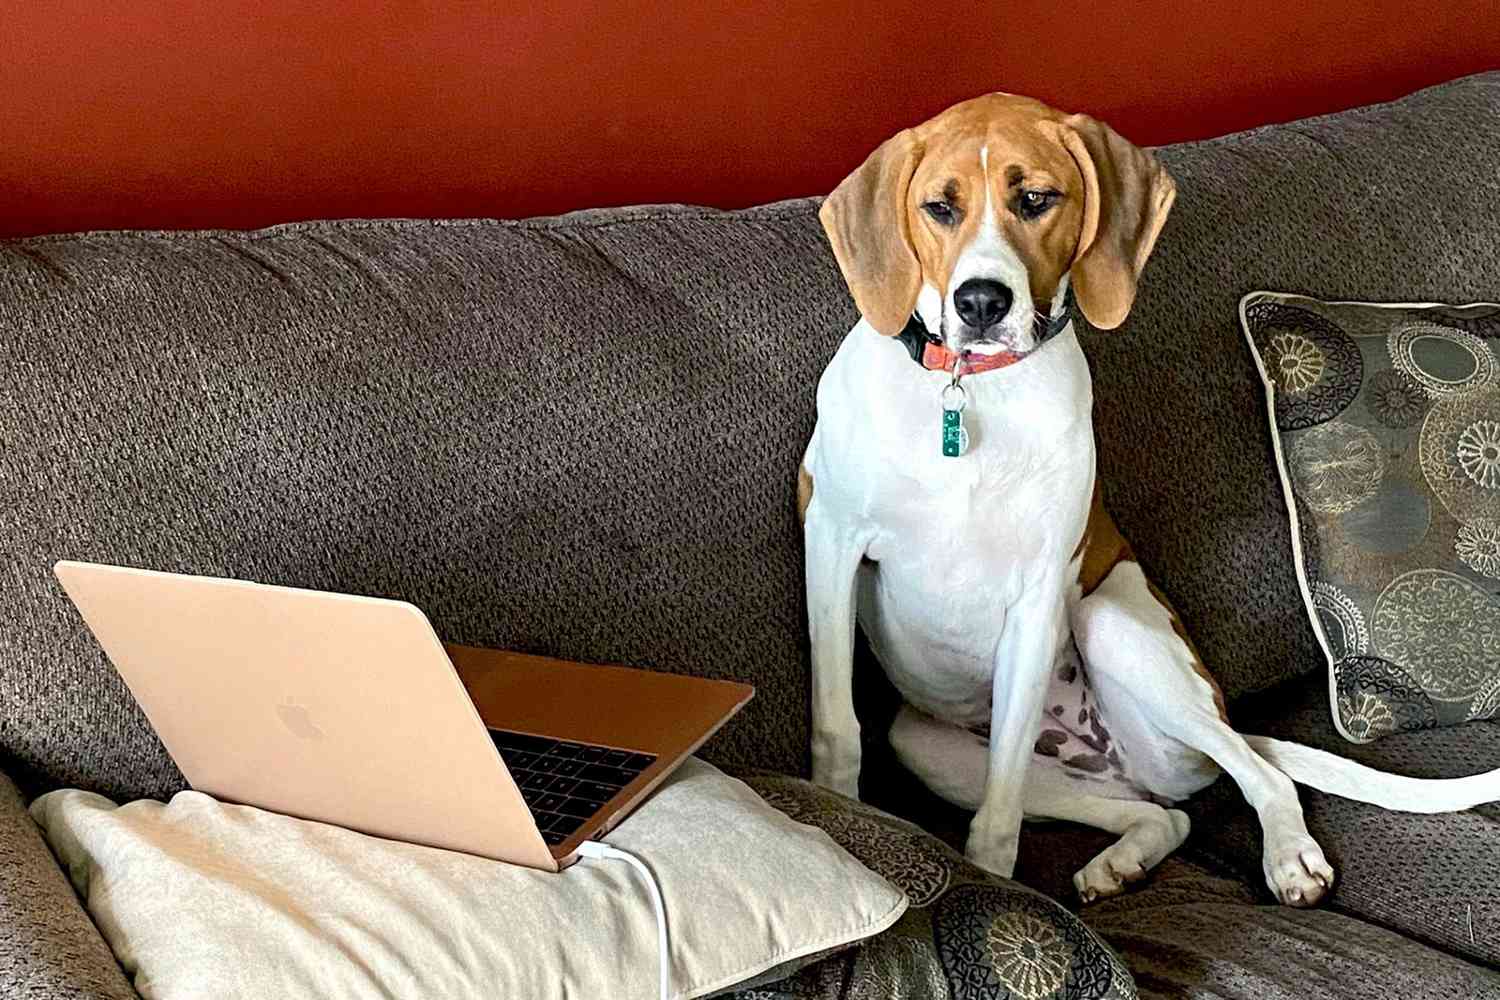 Beagle sits on couch and looks at laptop